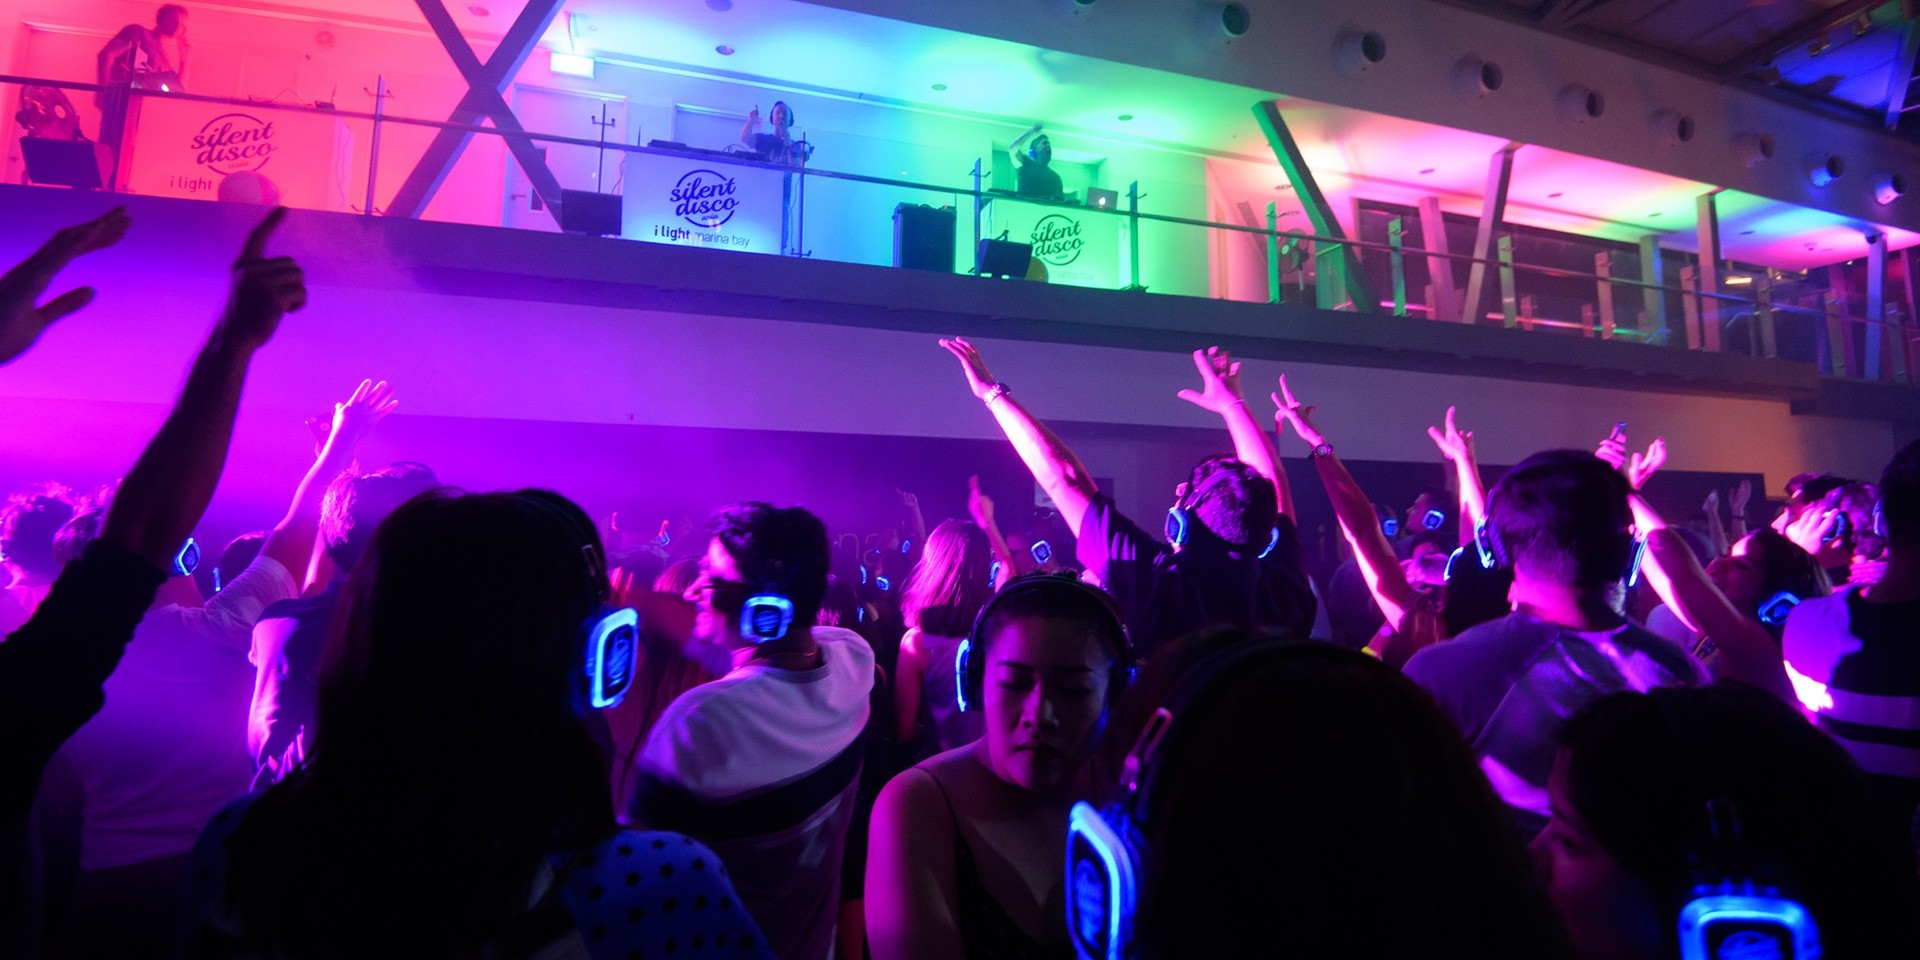 Silent Disco Asia returns with a New Year's Eve party at ArtScience Museum